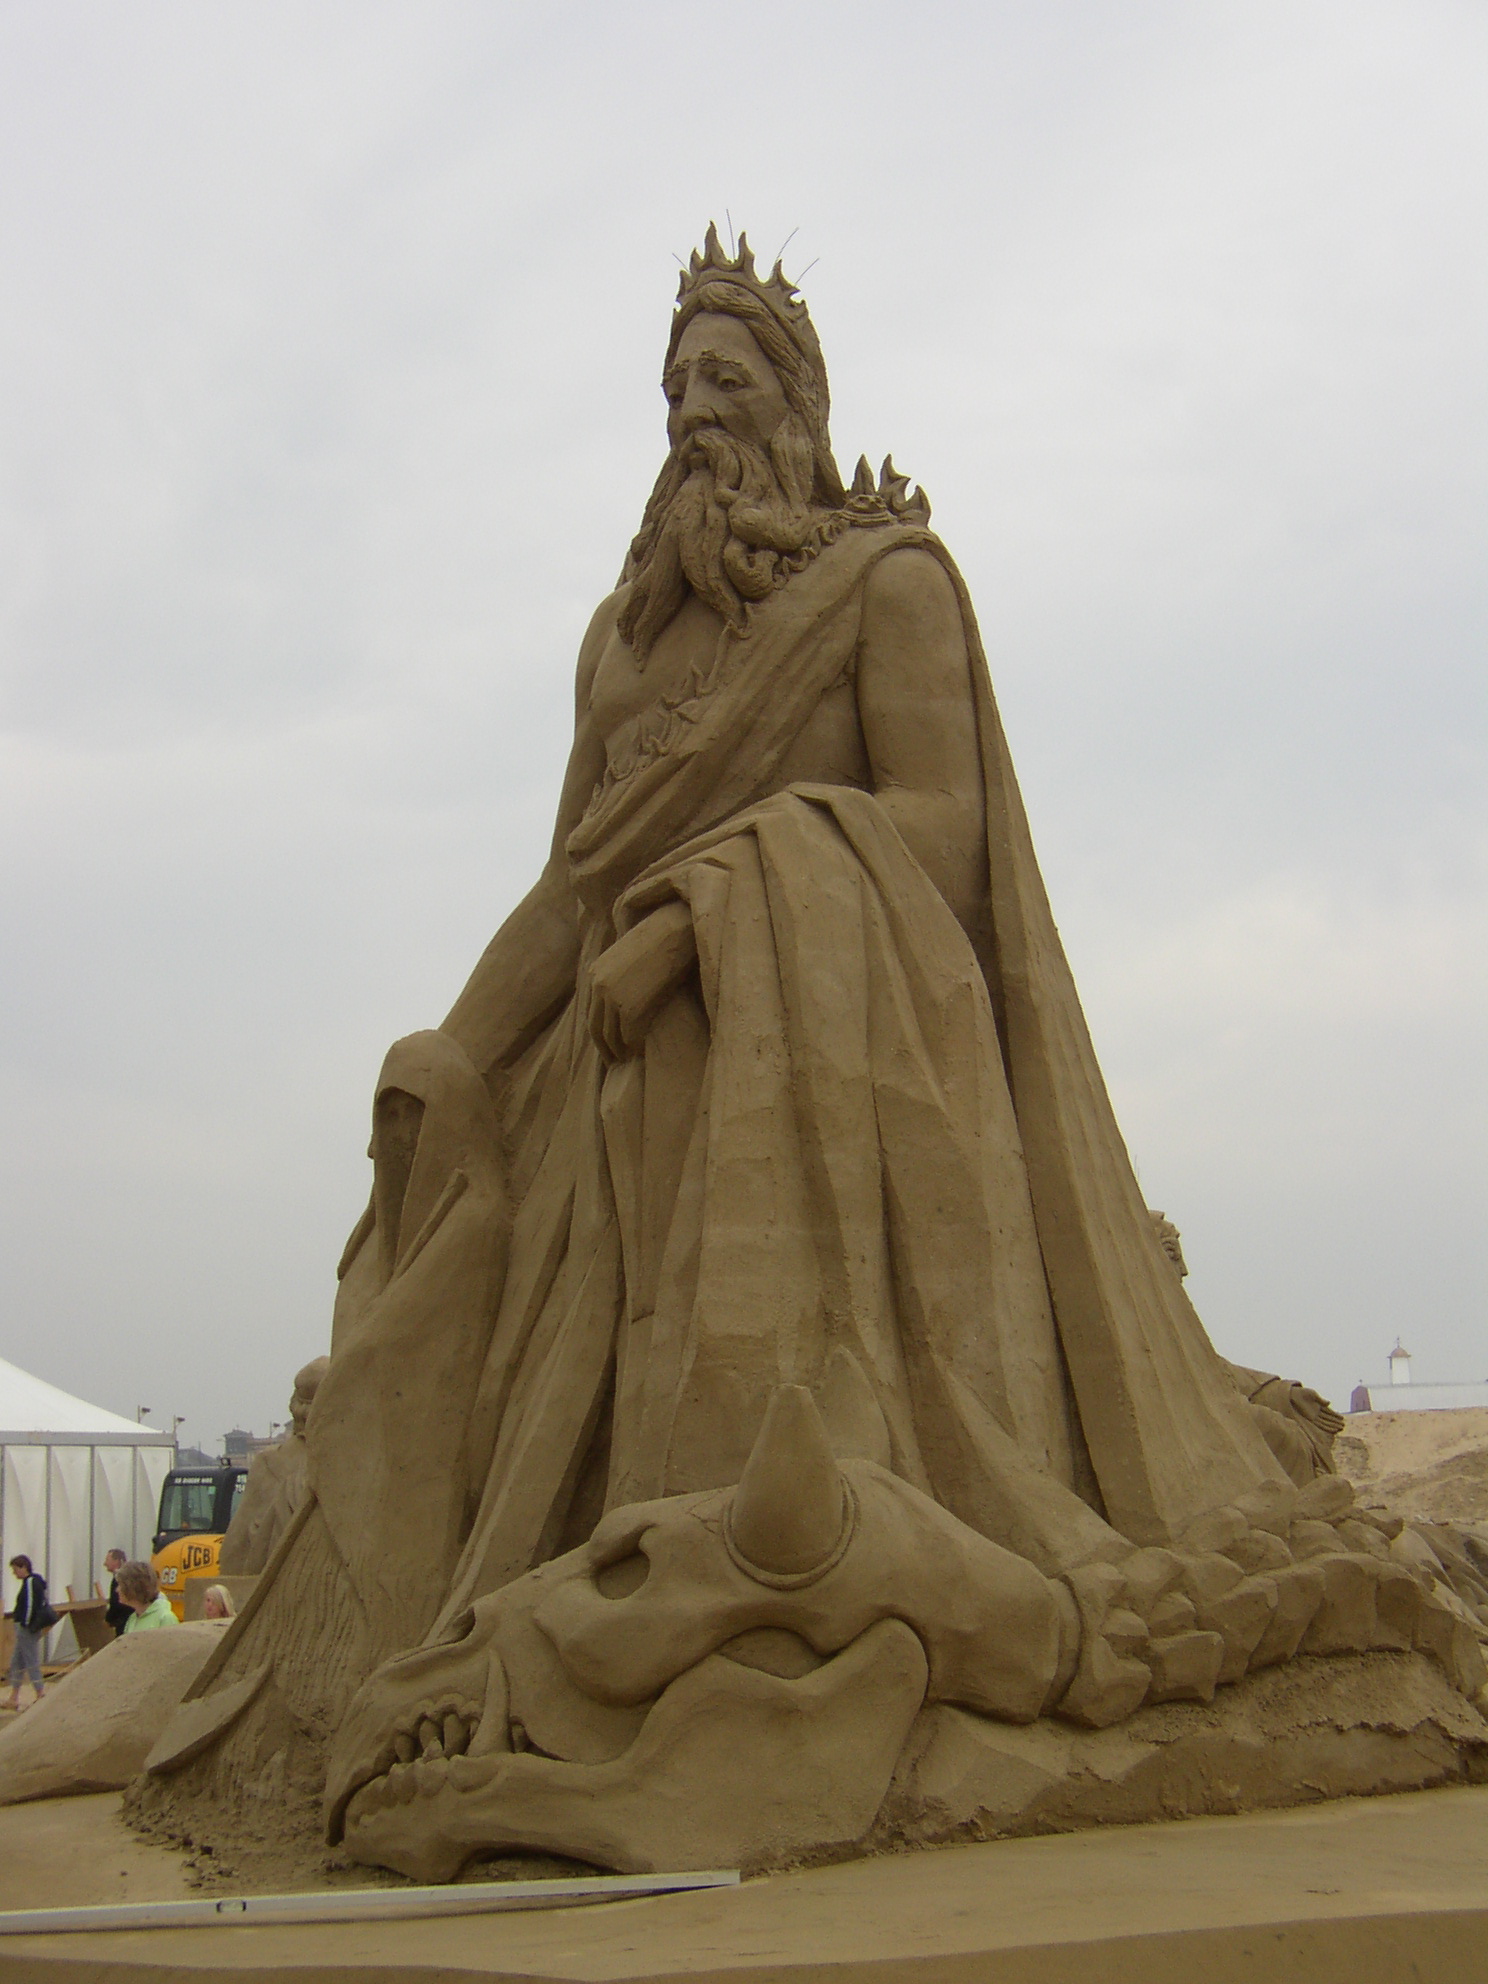 Sand sculpture great yarmouth norfolk by ispud via